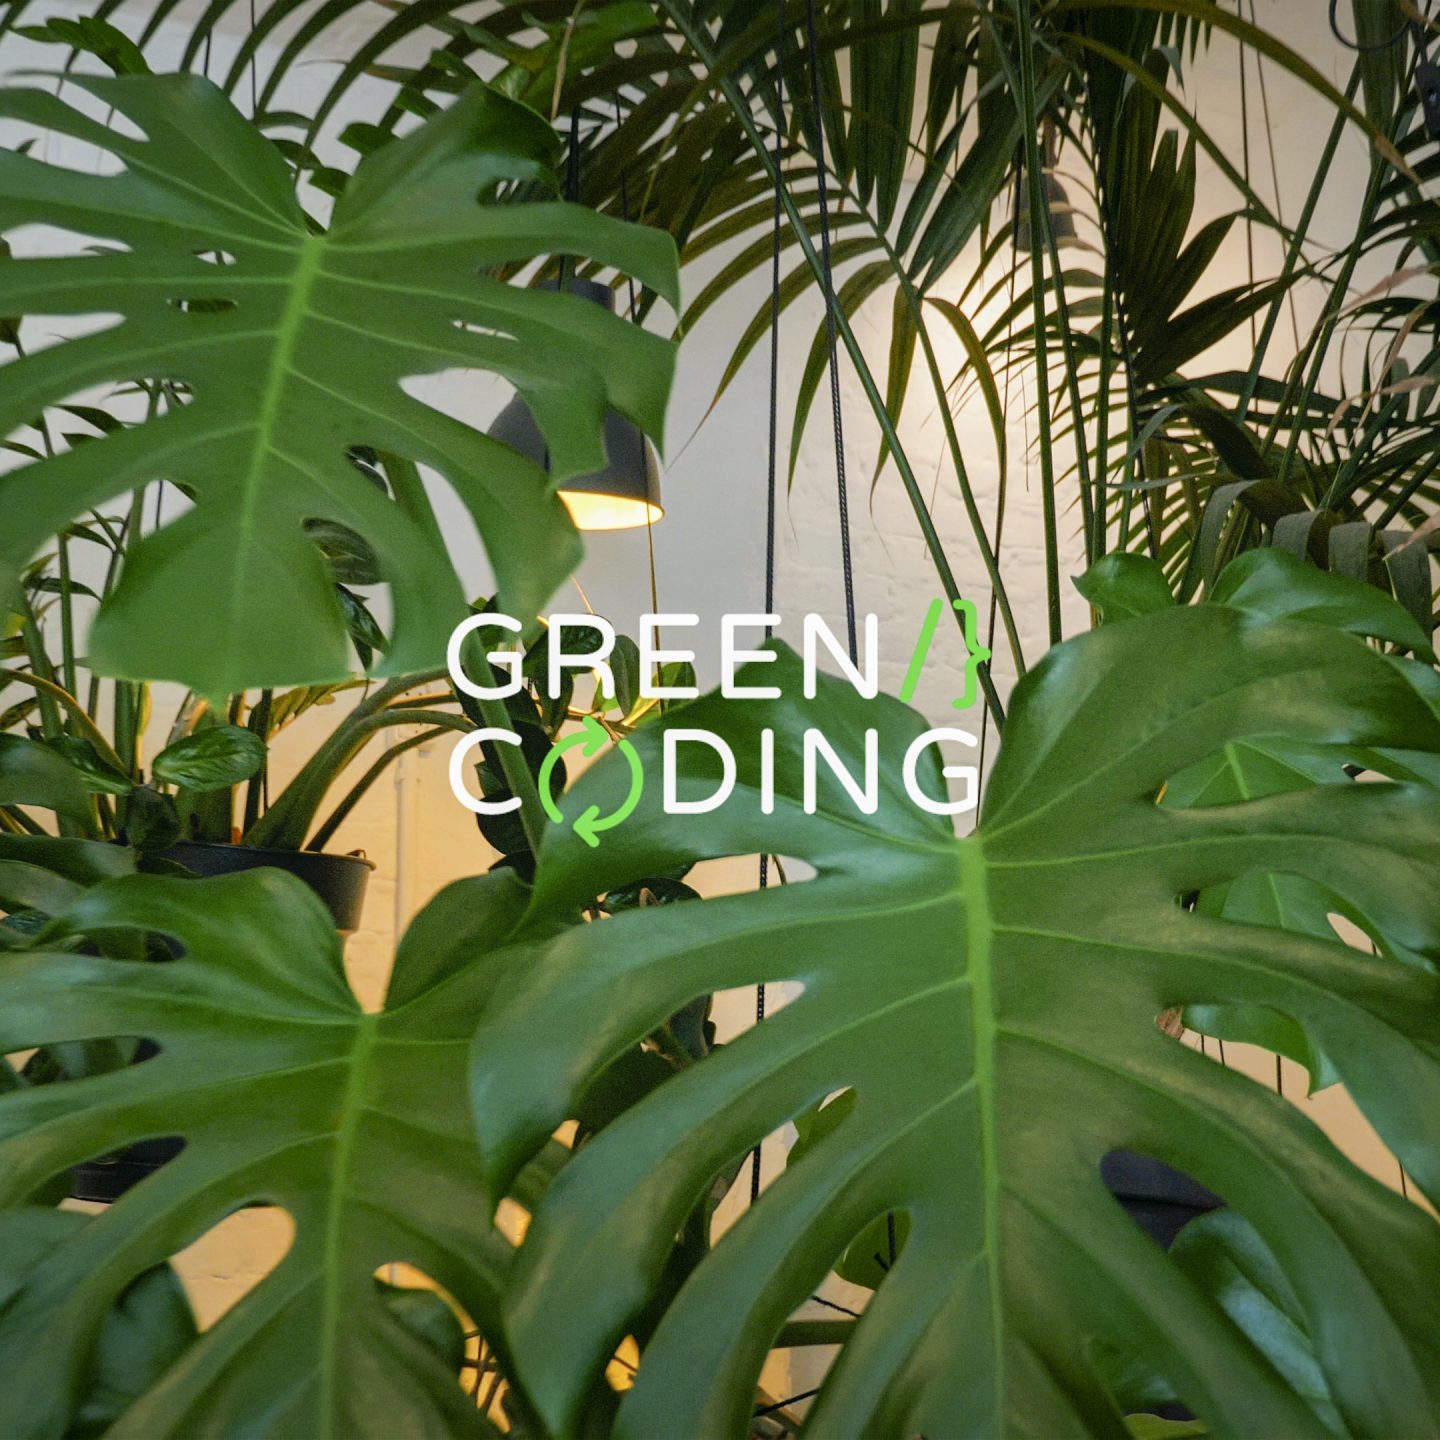 Background with plants and the title "Green coding"